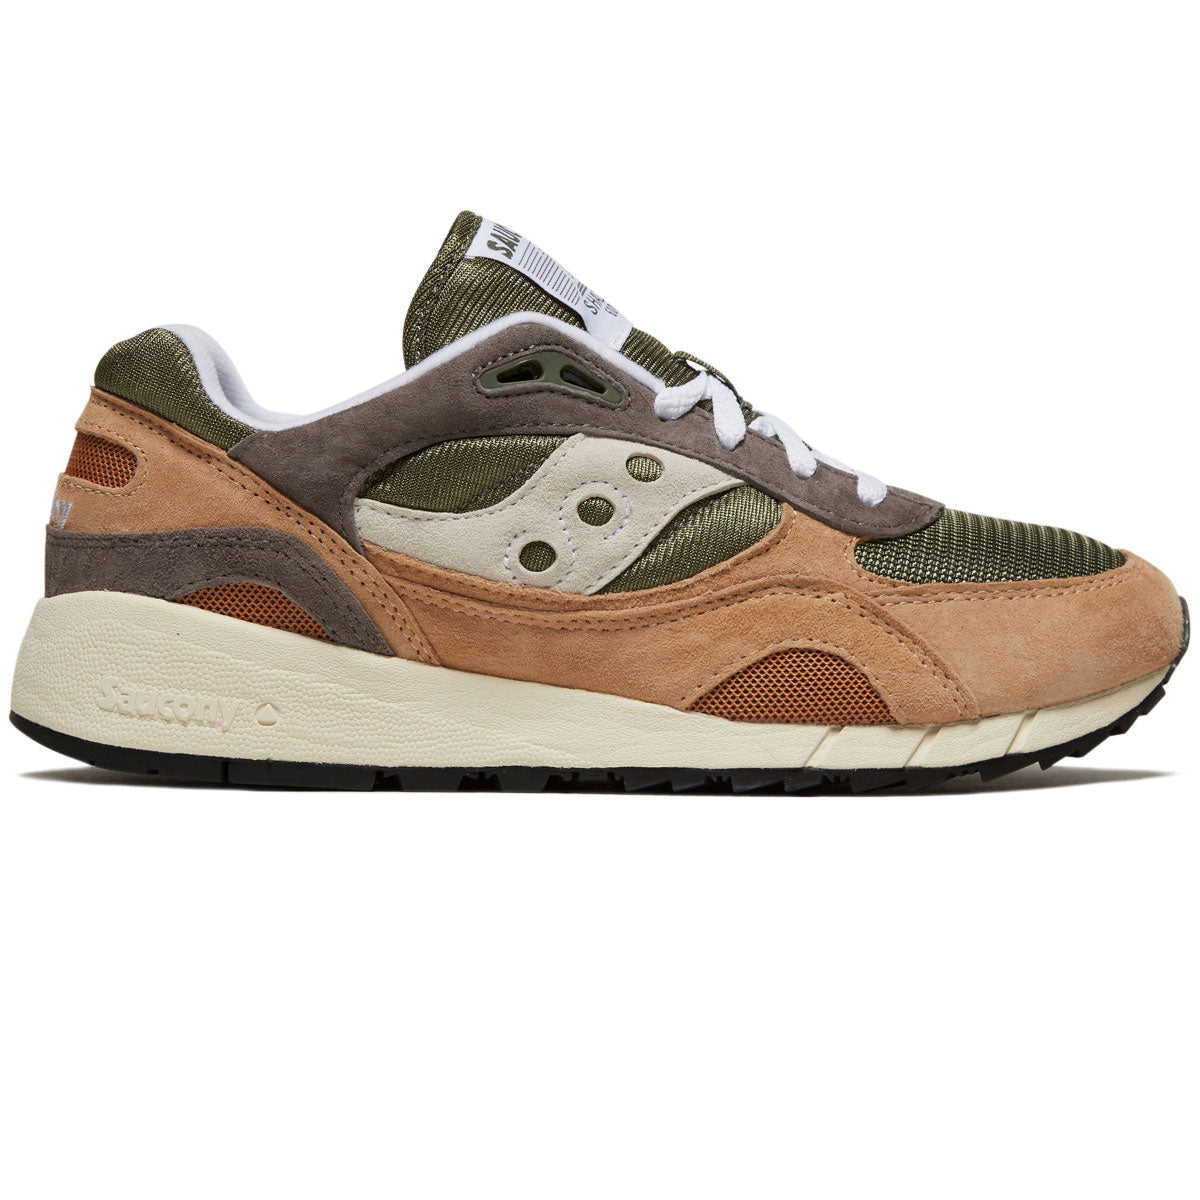 Saucony Shadow 6000 Shoes - Green/Brown image 1